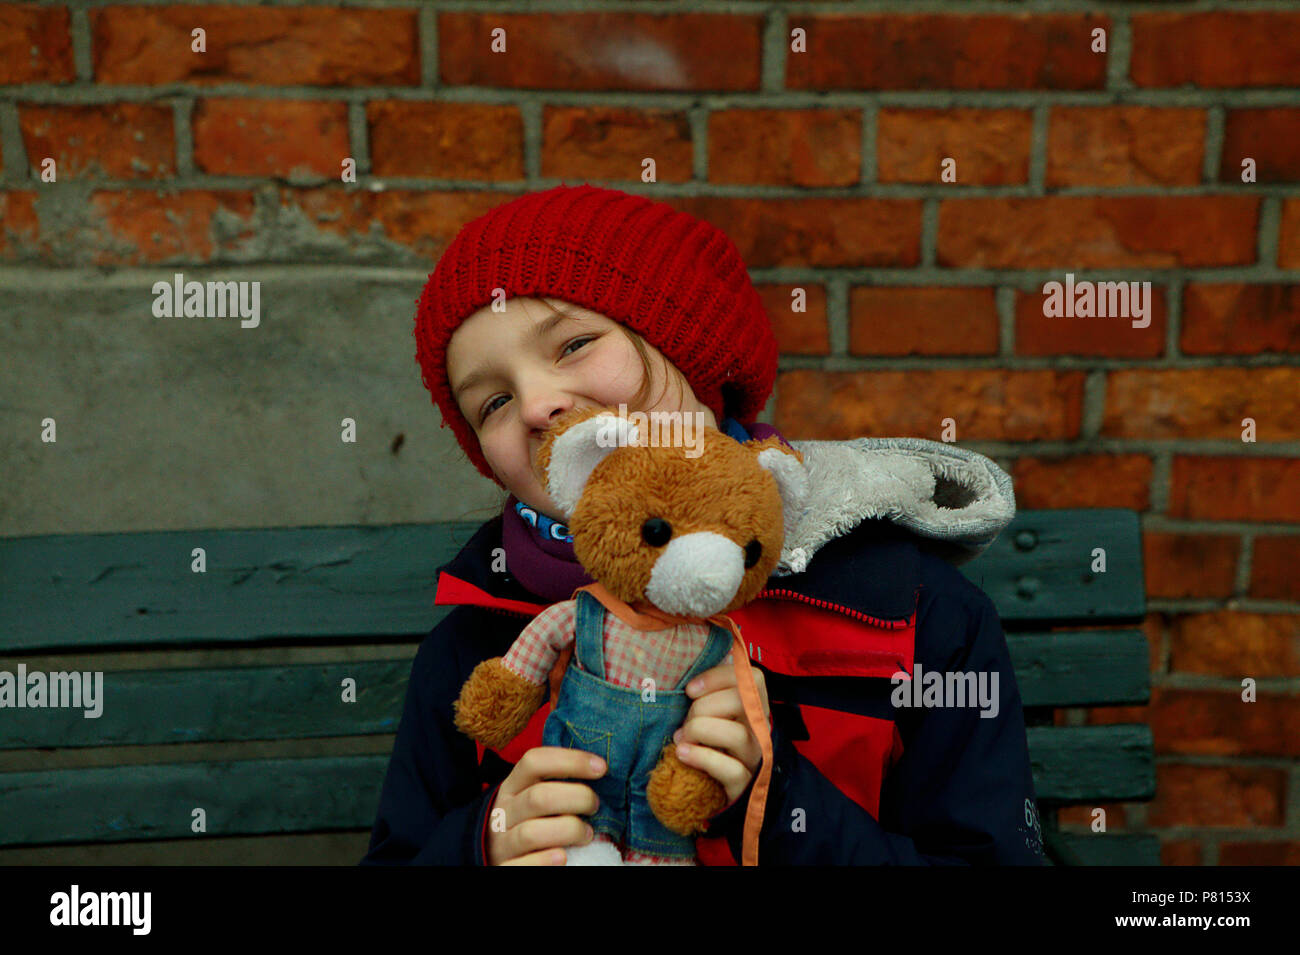 girl in red cap with teddy bear sitting on wooden banch Stock Photo